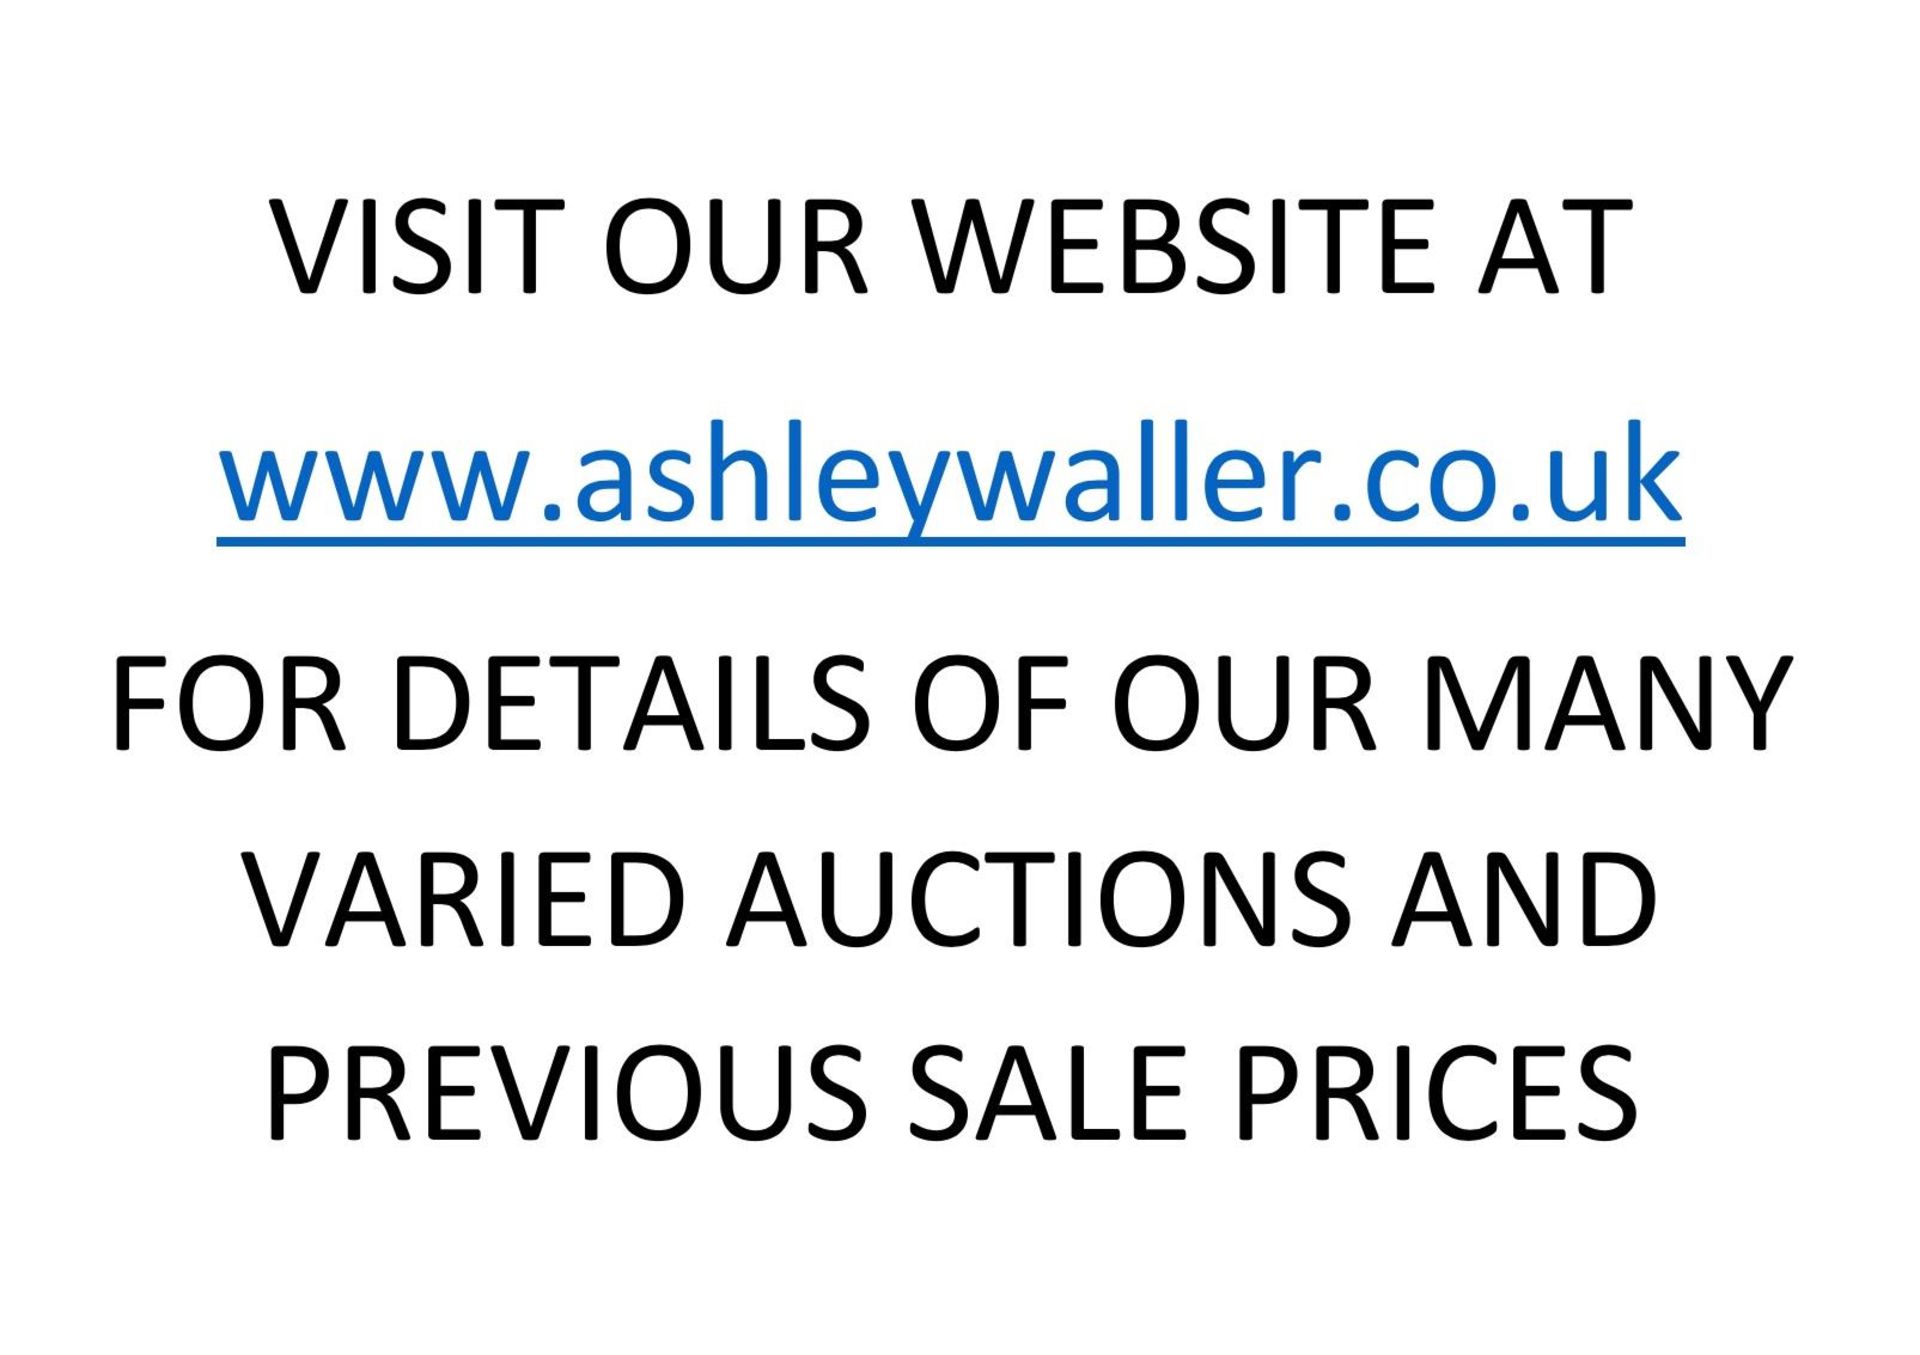 END OF SALE, THANK YOU FOR YOUR BIDDING. OUR NEXT SALE IS ON THE 27TH AND 28TH MARCH 2024